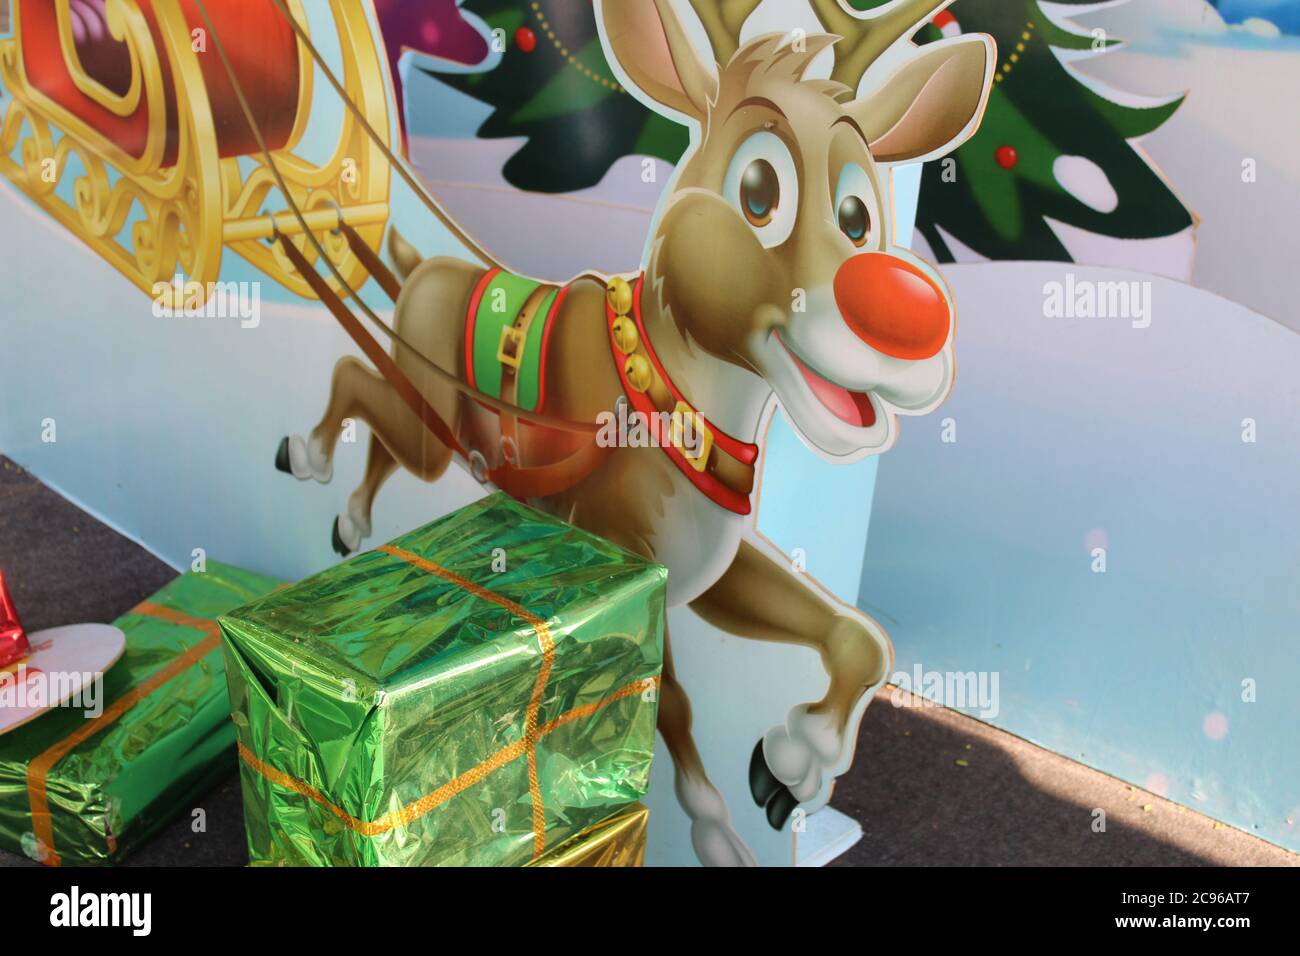 Kolkata, West Bengal/India - December 29, 2019: Cropped View of Santa Claus and Christmas tree and colorful gift boxes for Christmas decoration at Par Stock Photo